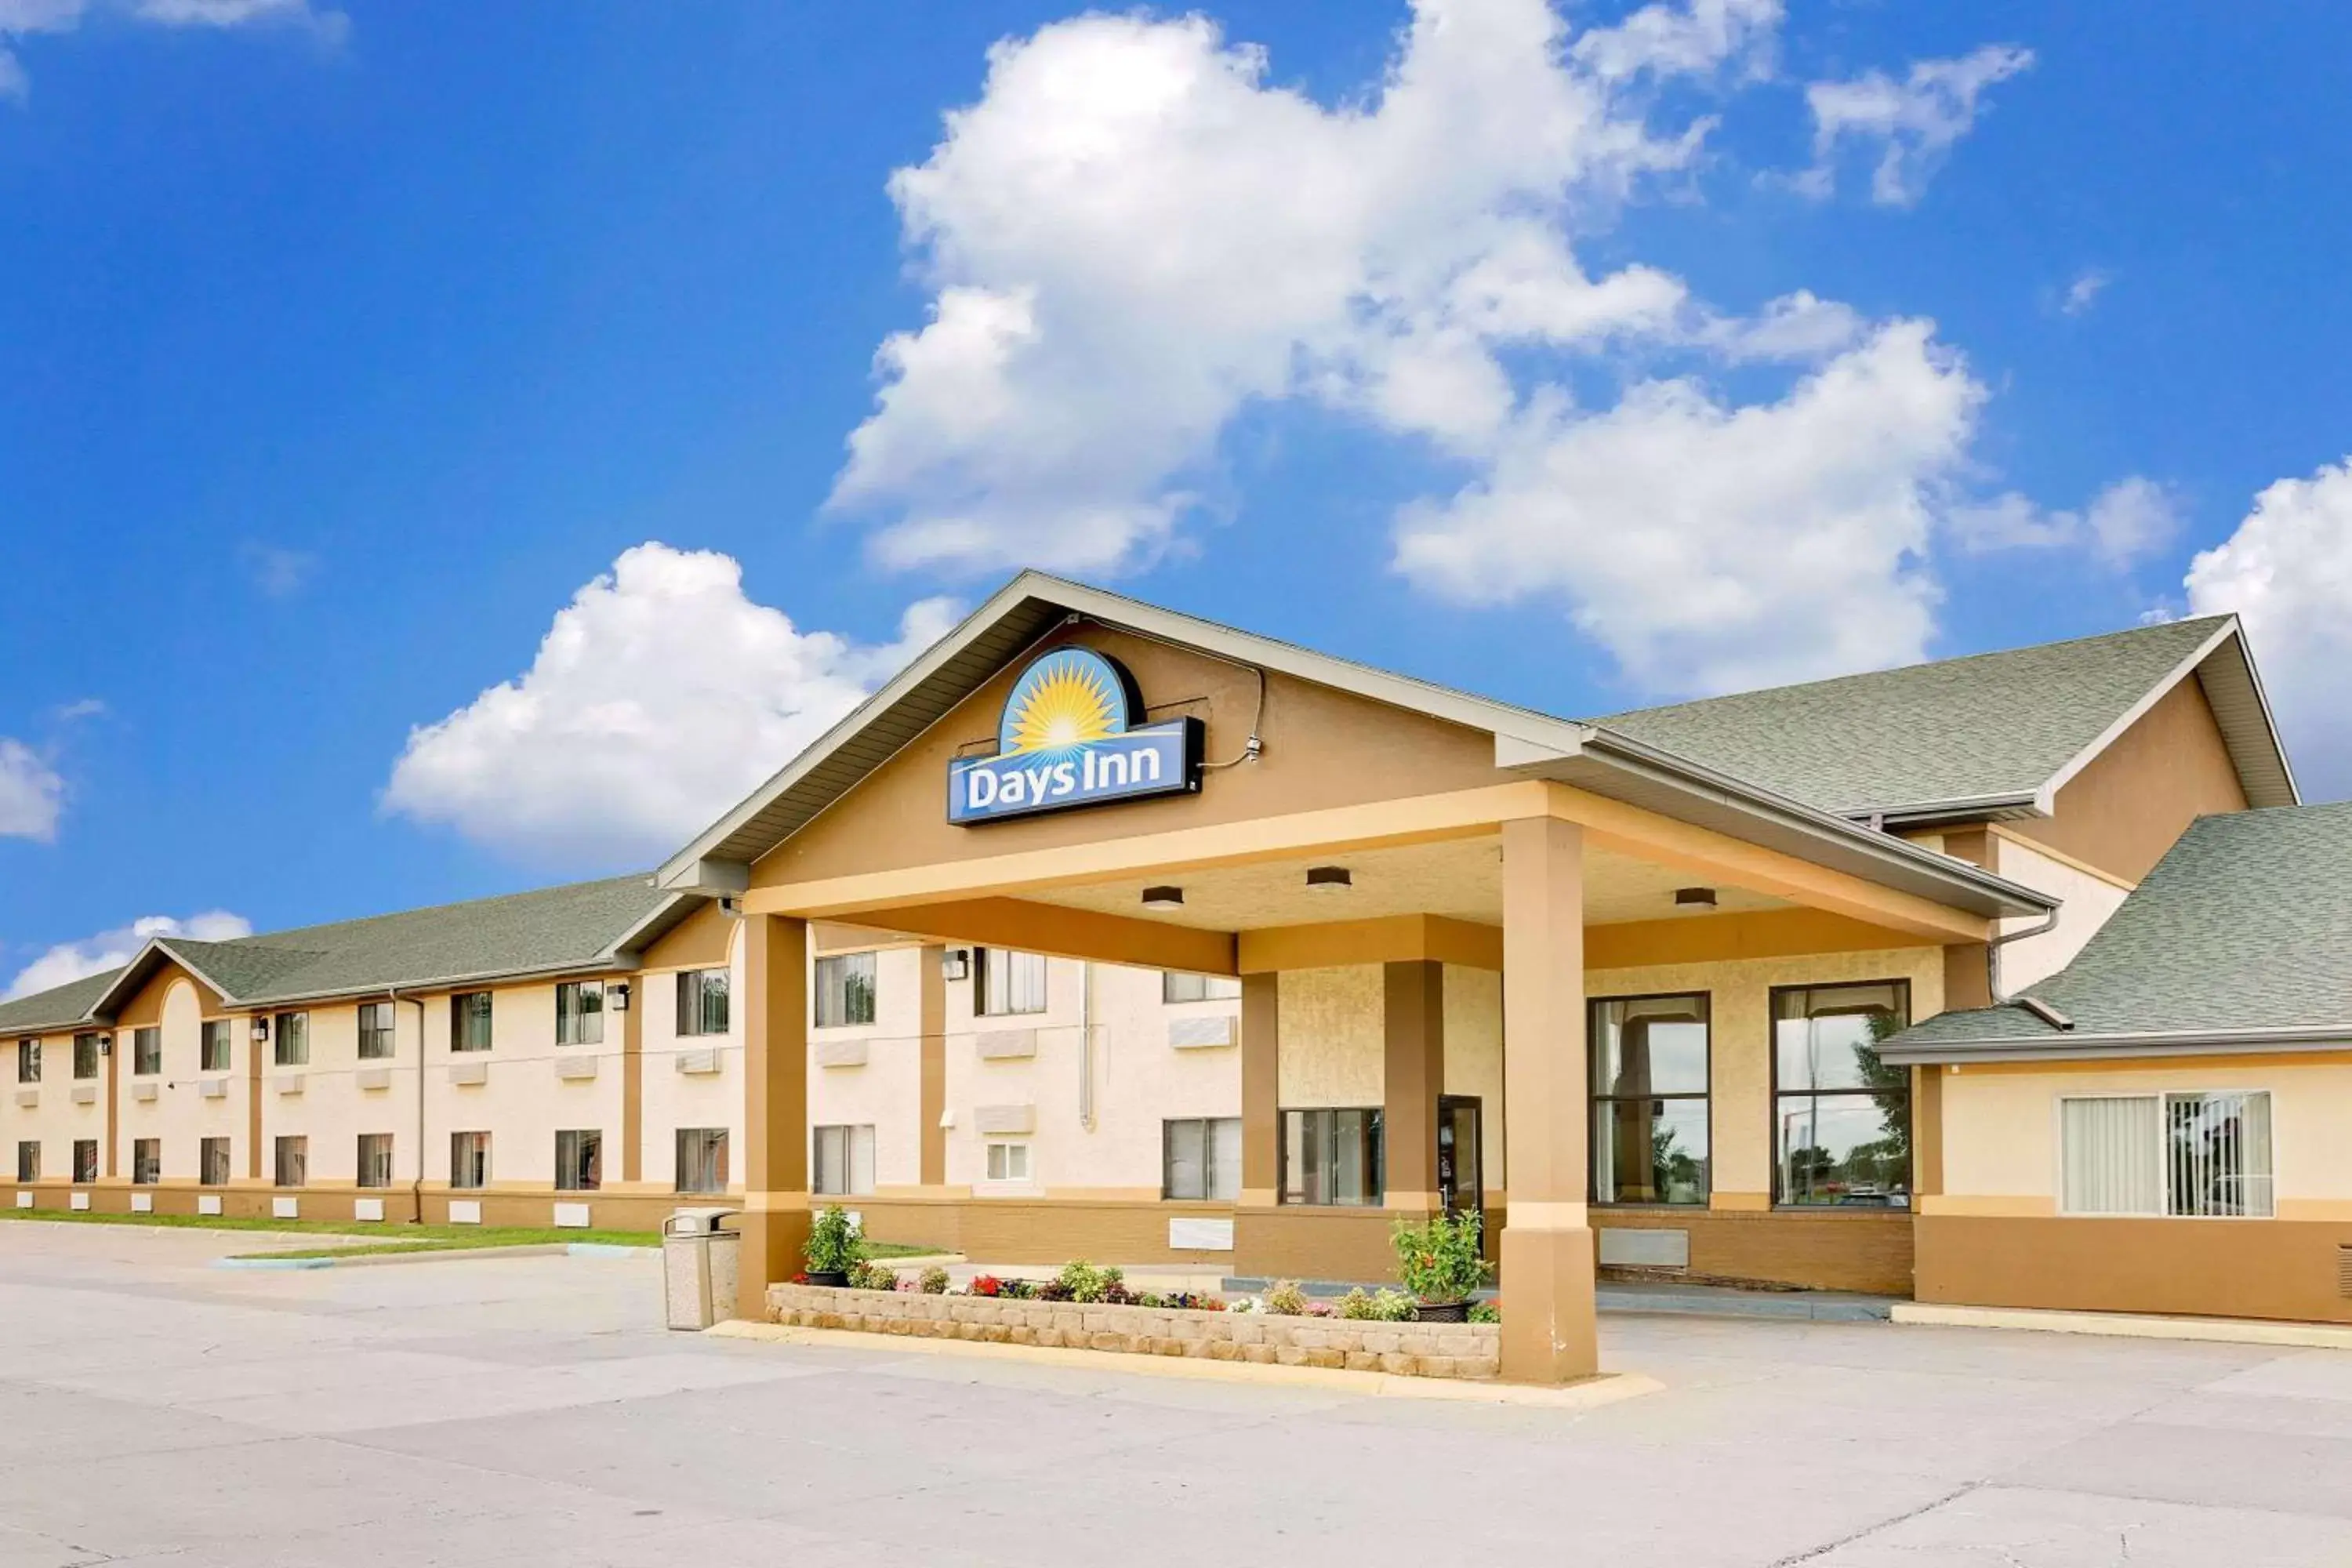 Property Building in Days Inn by Wyndham North Sioux City